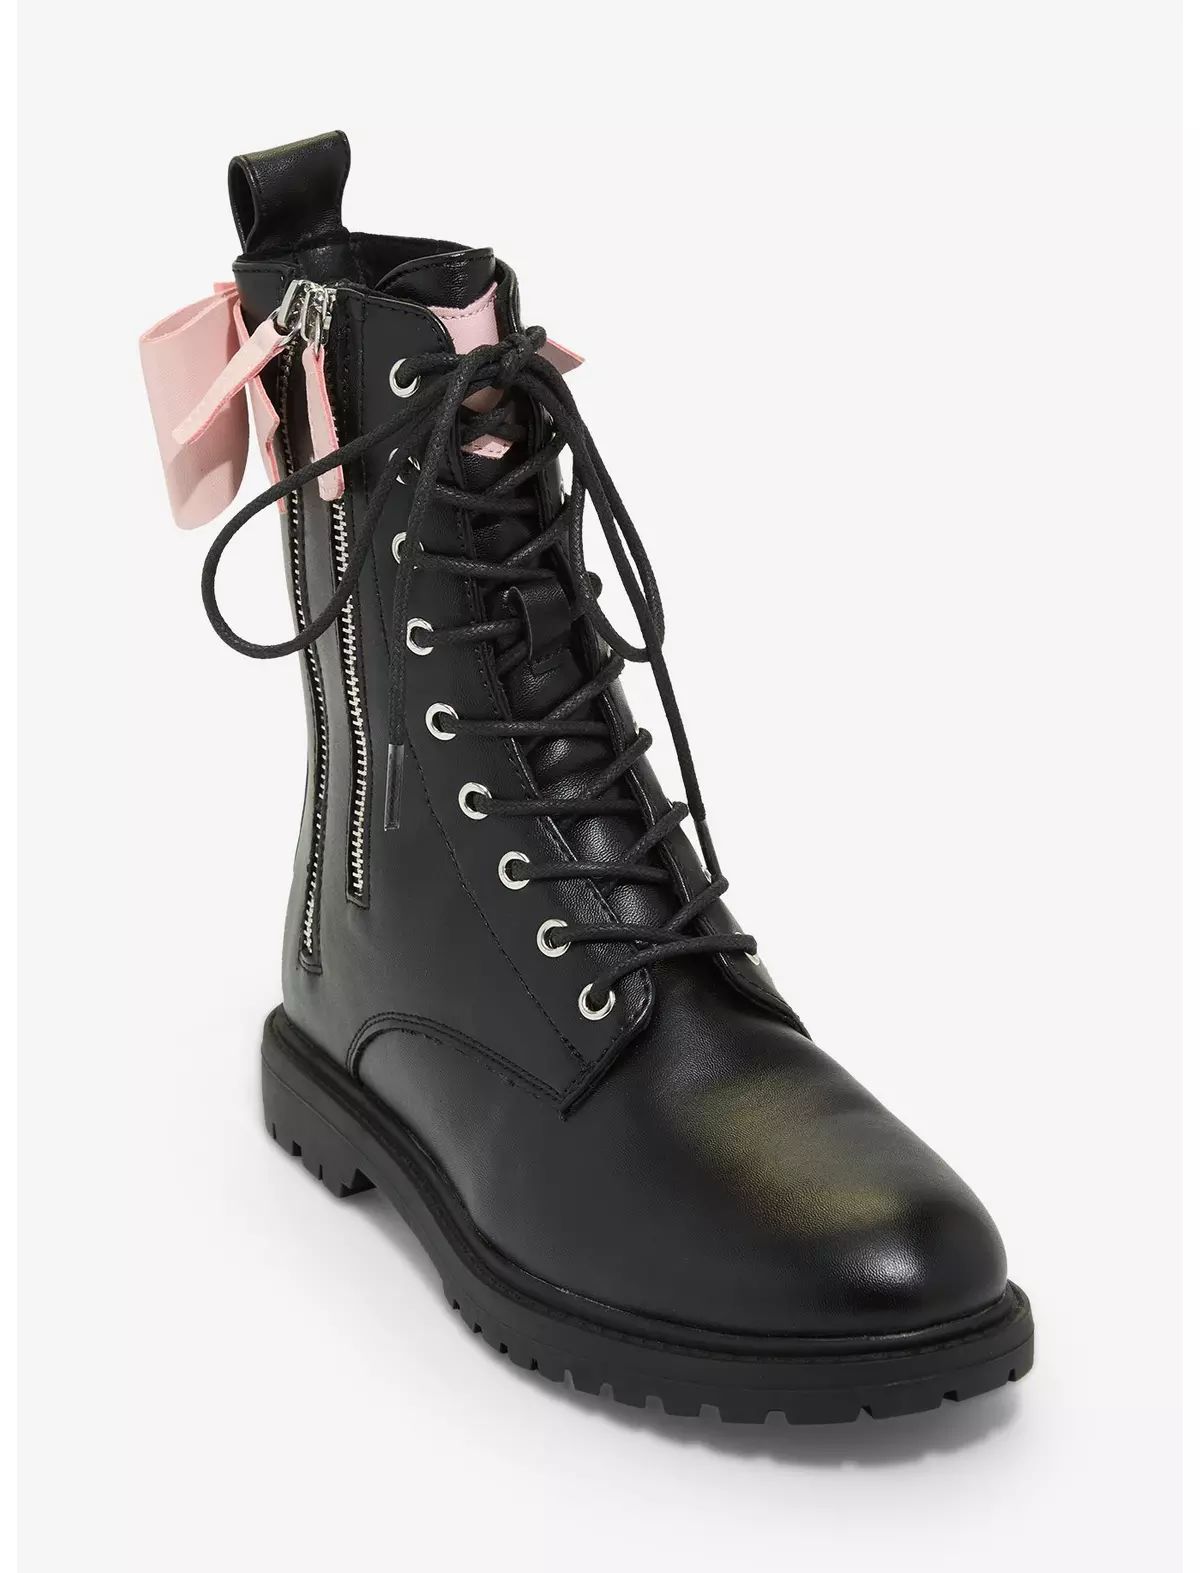 Black & Pink Lace-Up Bow Combat Boots | Hot Topic | Hot Topic